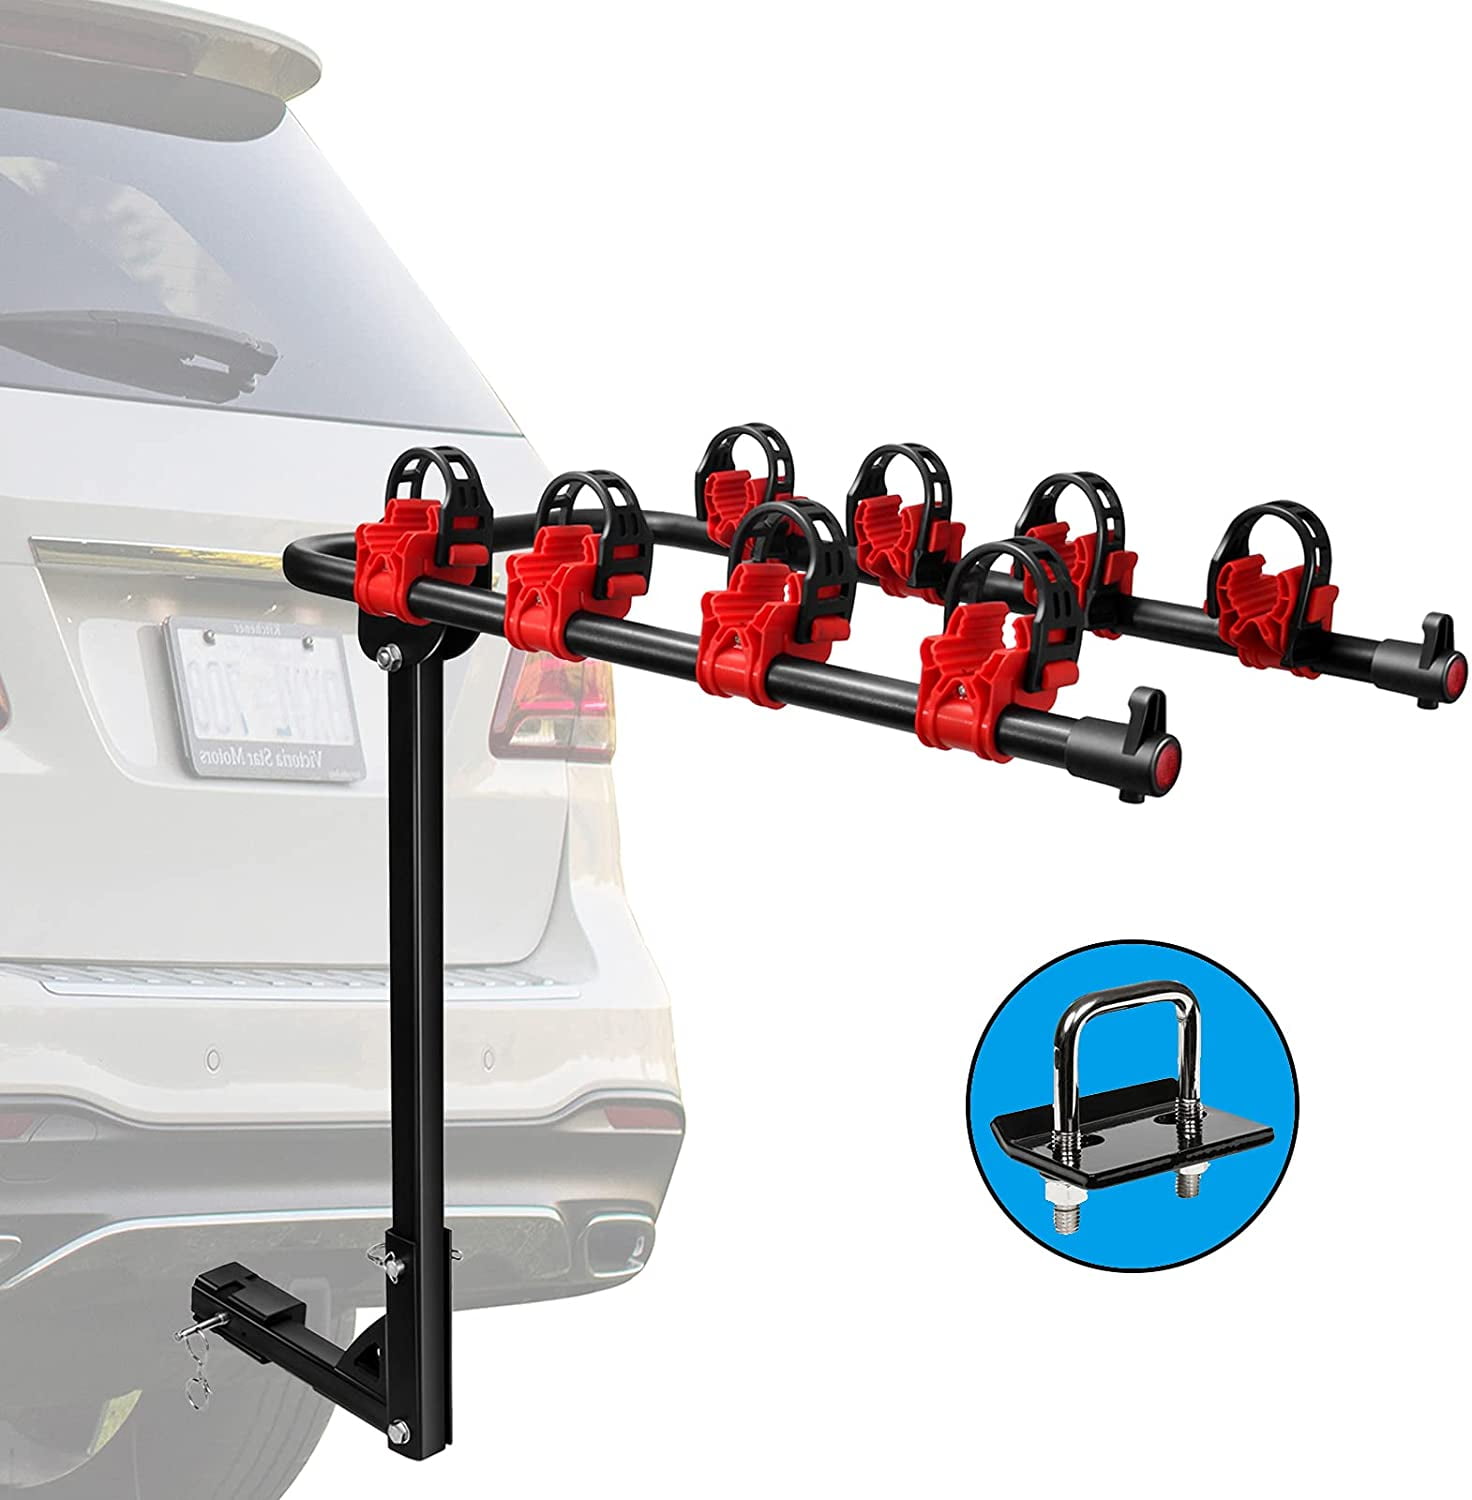 Trunk Mounted Bike Rack Durable Sturdy Auto SUV Sedan Accessory Fits 2 Bicycles 